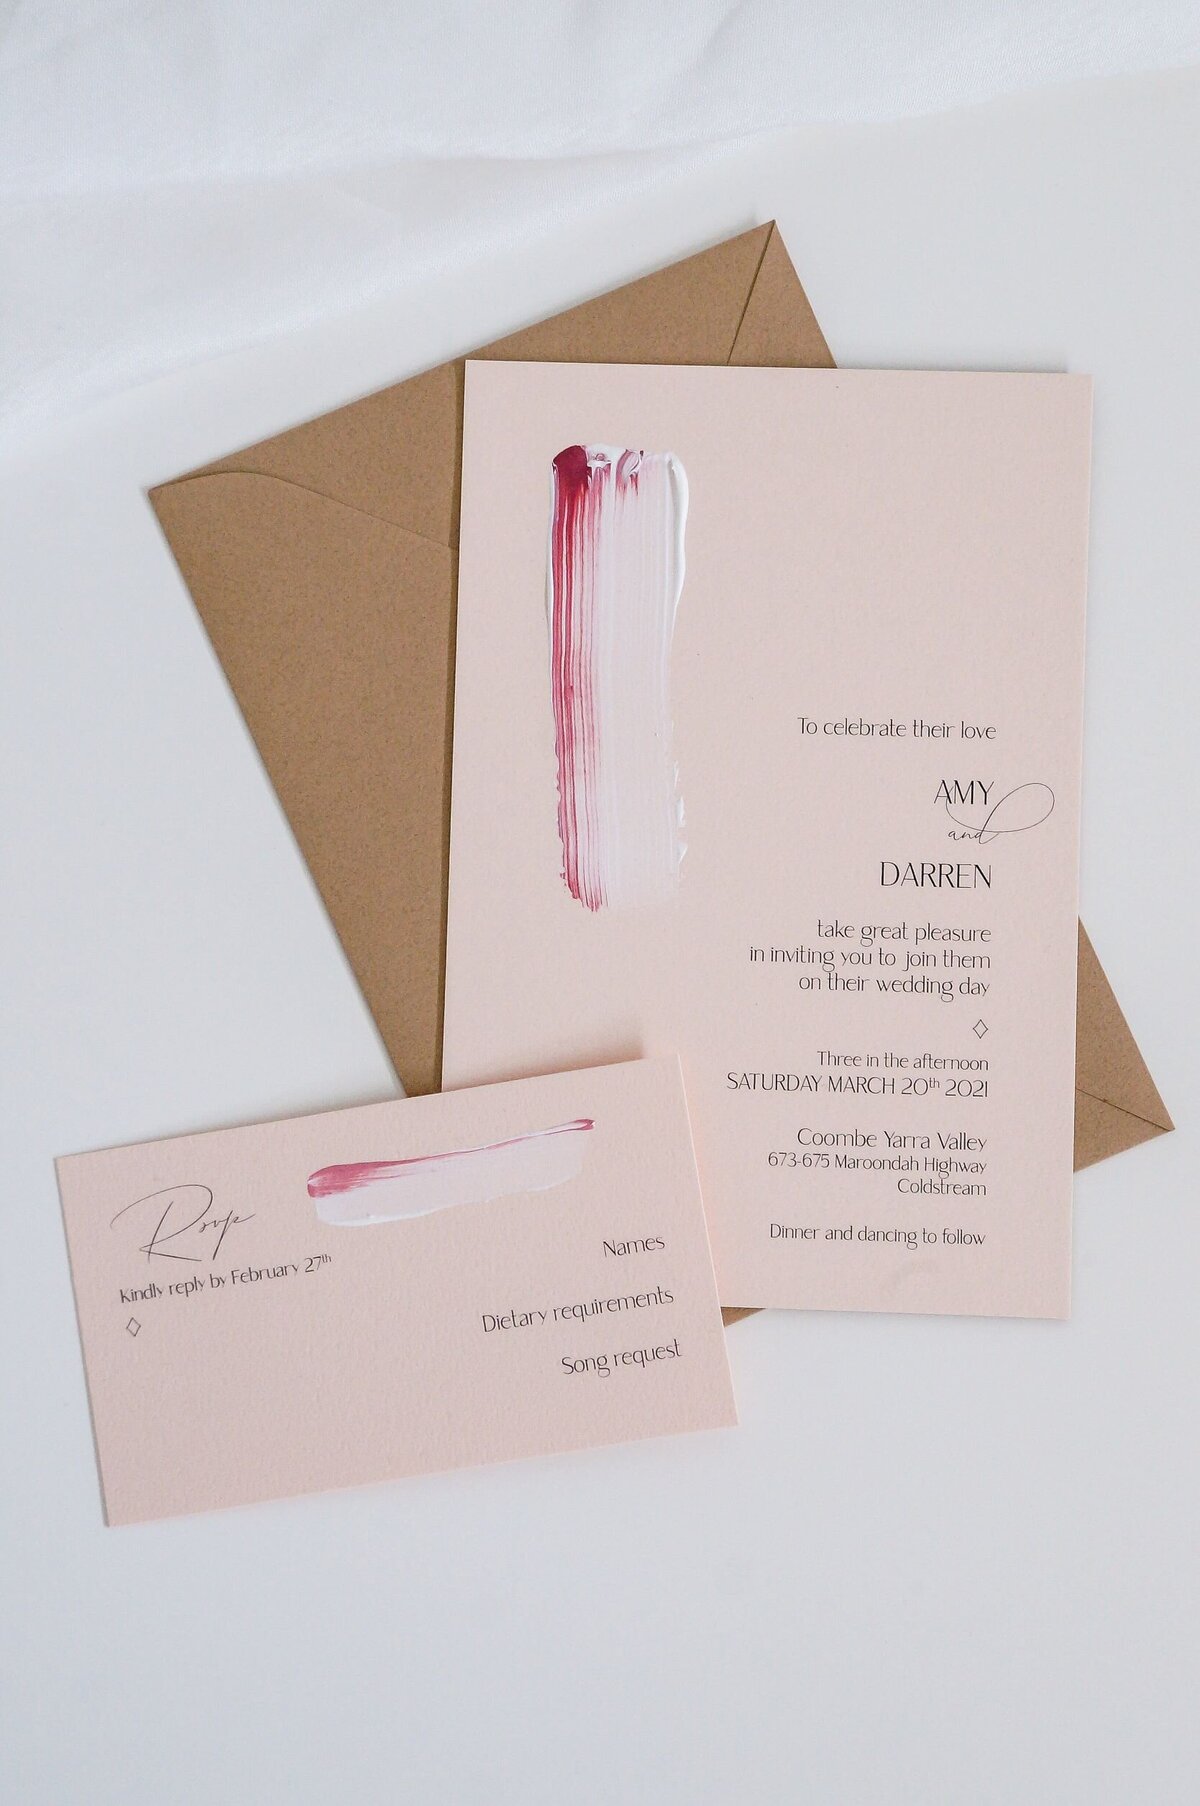 Pink and caramel painted artistic wedding invite with caramel brown envelope